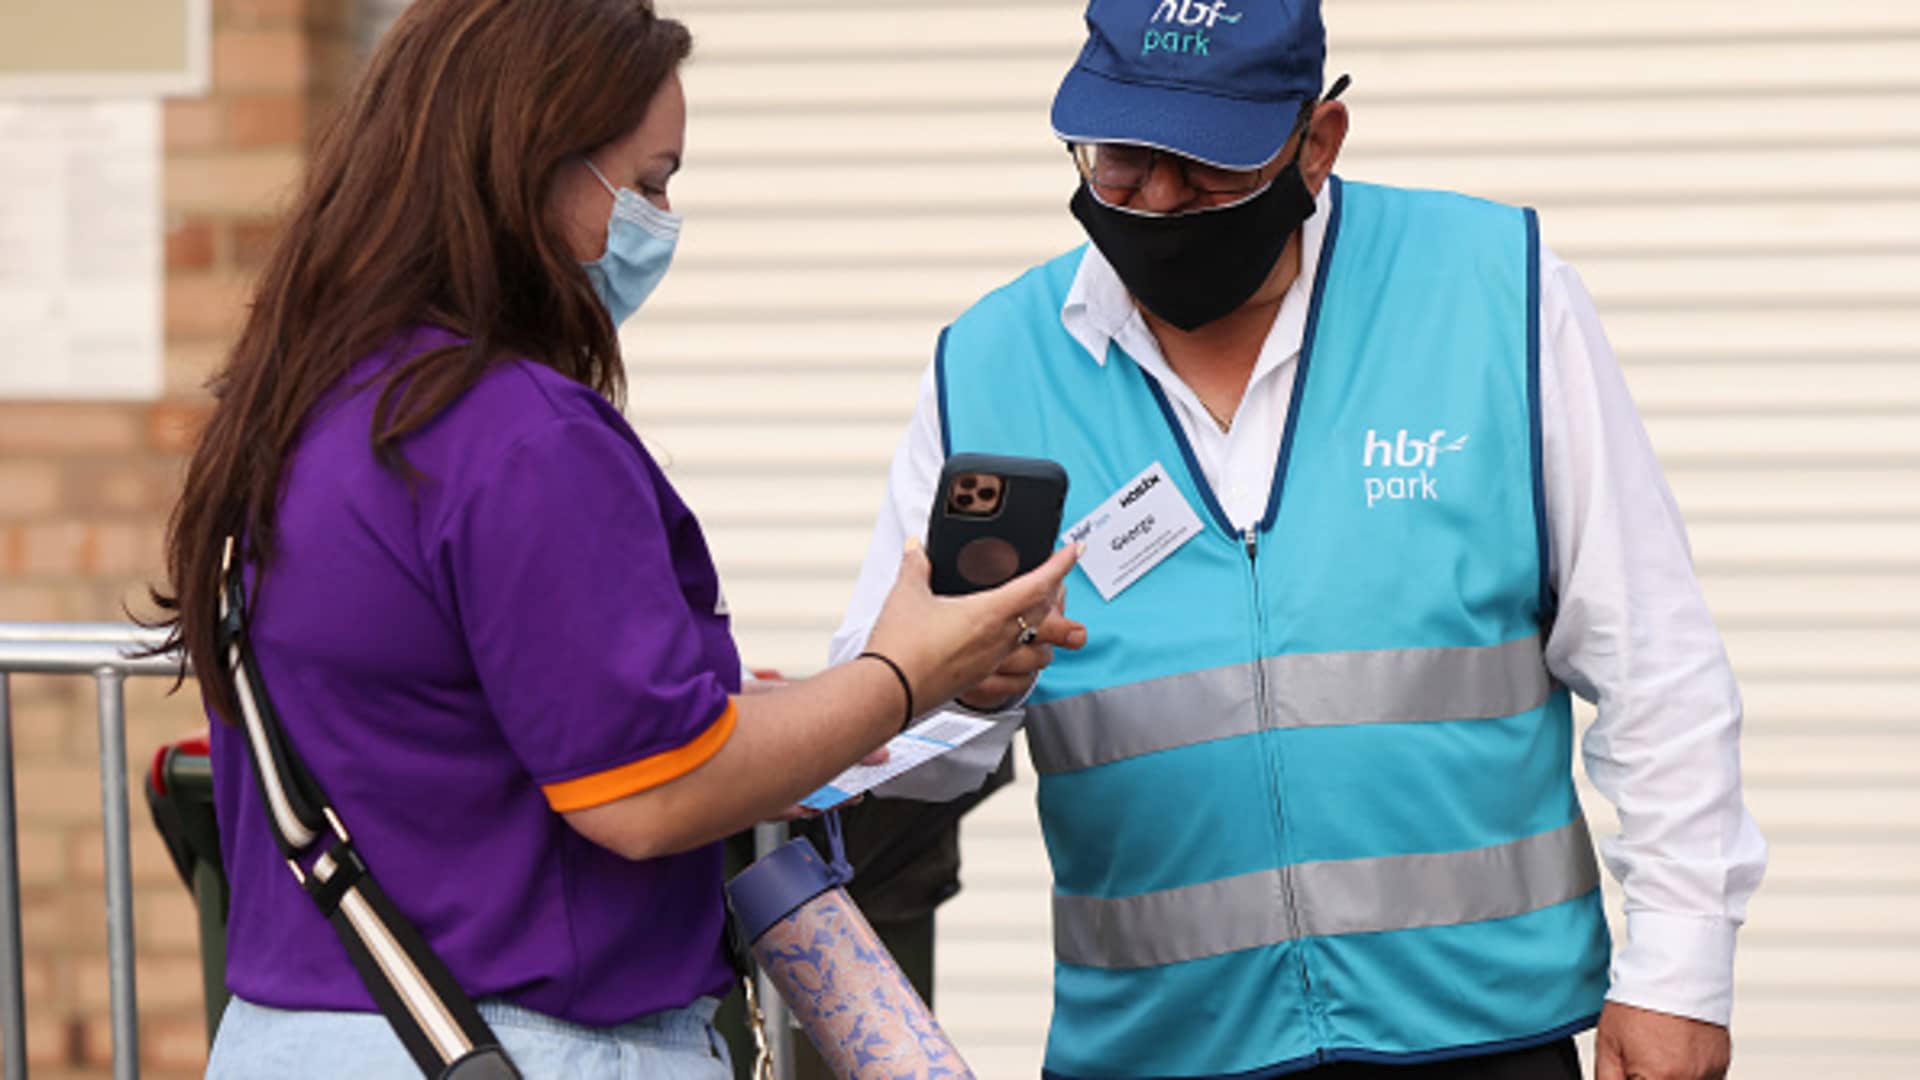 A masked spectator has her proof of vaccination verified before entering the A-League Men's match between Perth Glory and Central Coast Mariners at HBF Park on March 15, 2022, in Perth, Australia.